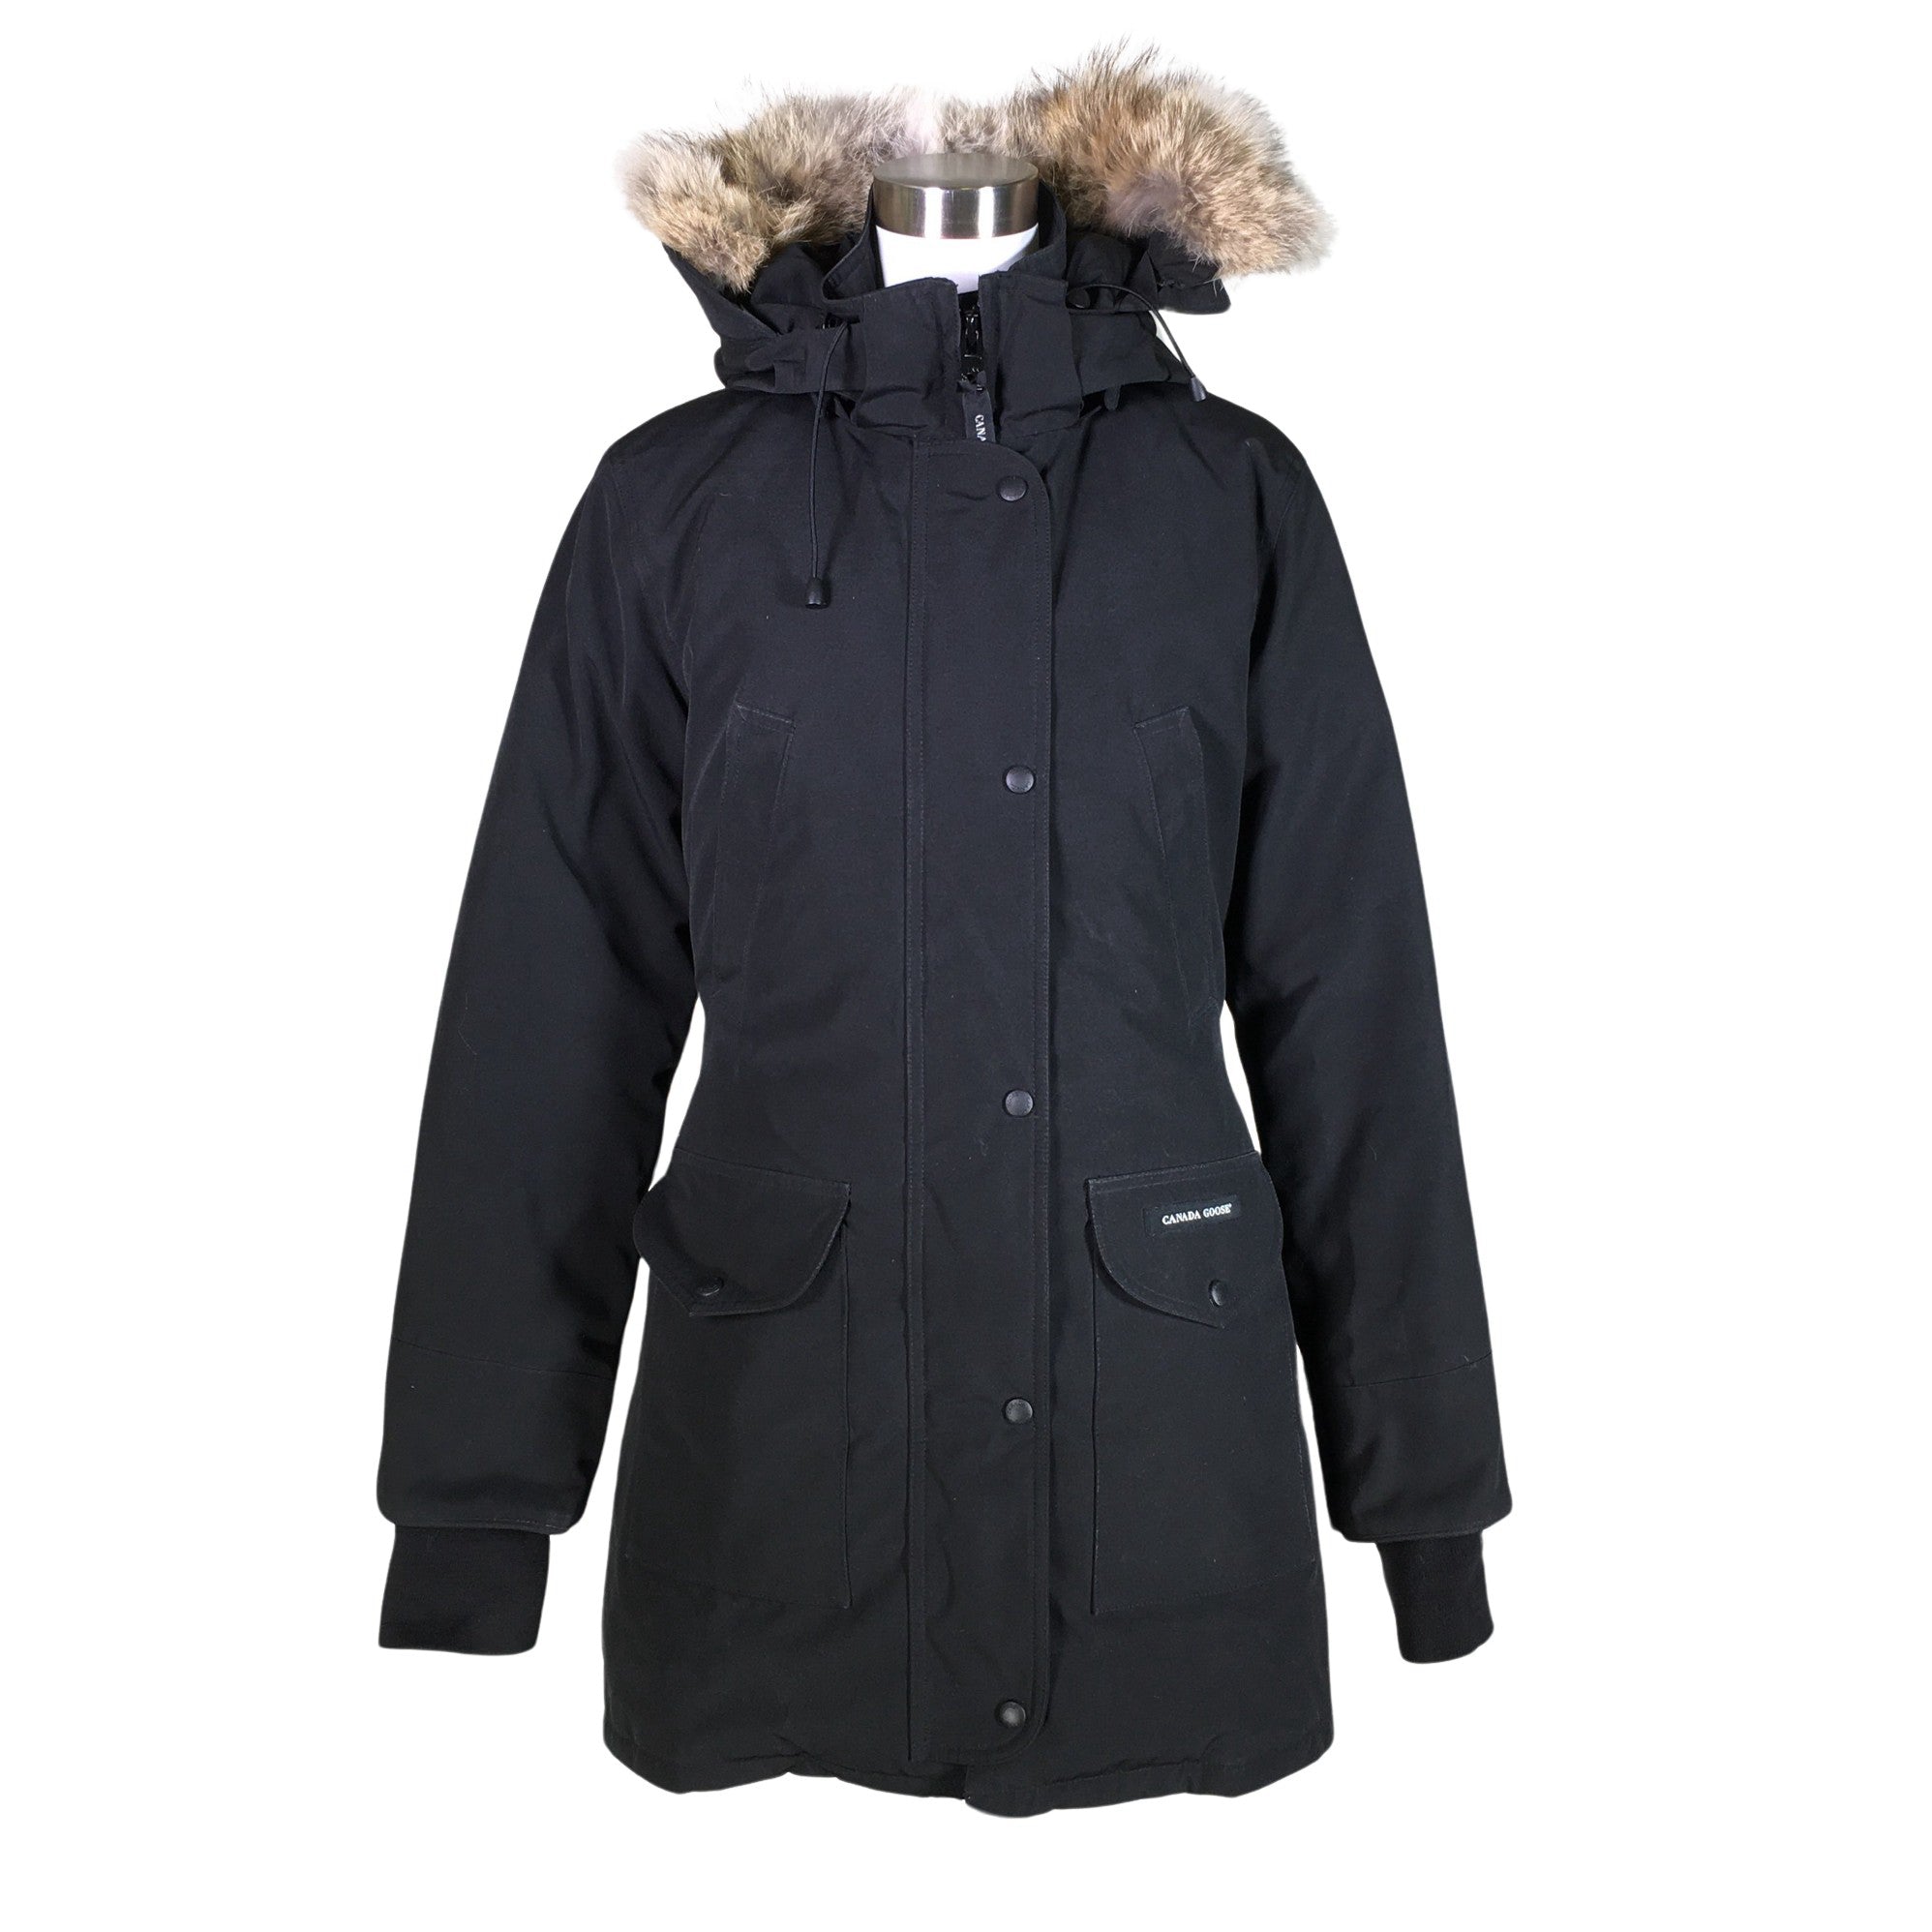 The Miller Affect wearing a Canada Goose Trillium Parka from